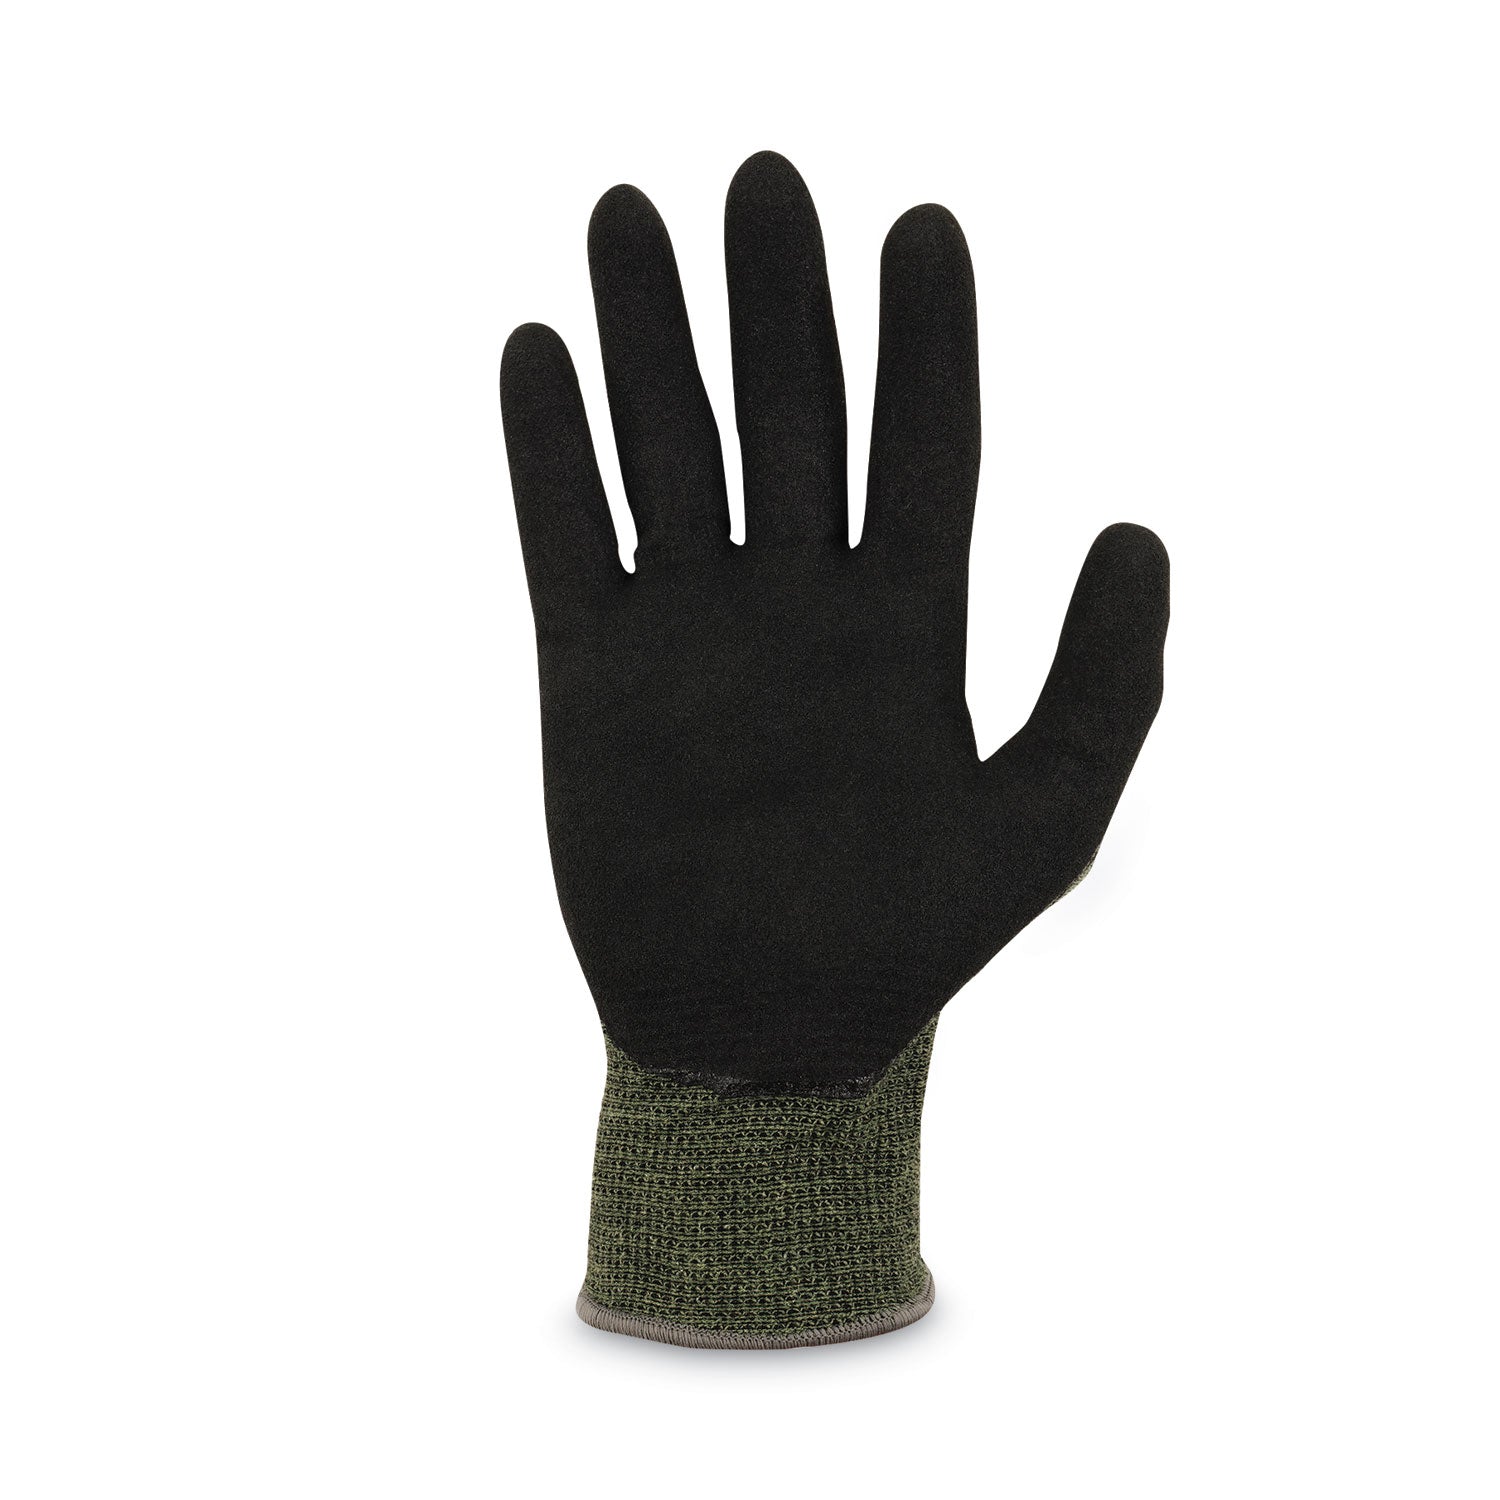 proflex-7042-ansi-a4-nitrile-coated-cr-gloves-green-large-pair-ships-in-1-3-business-days_ego10344 - 6